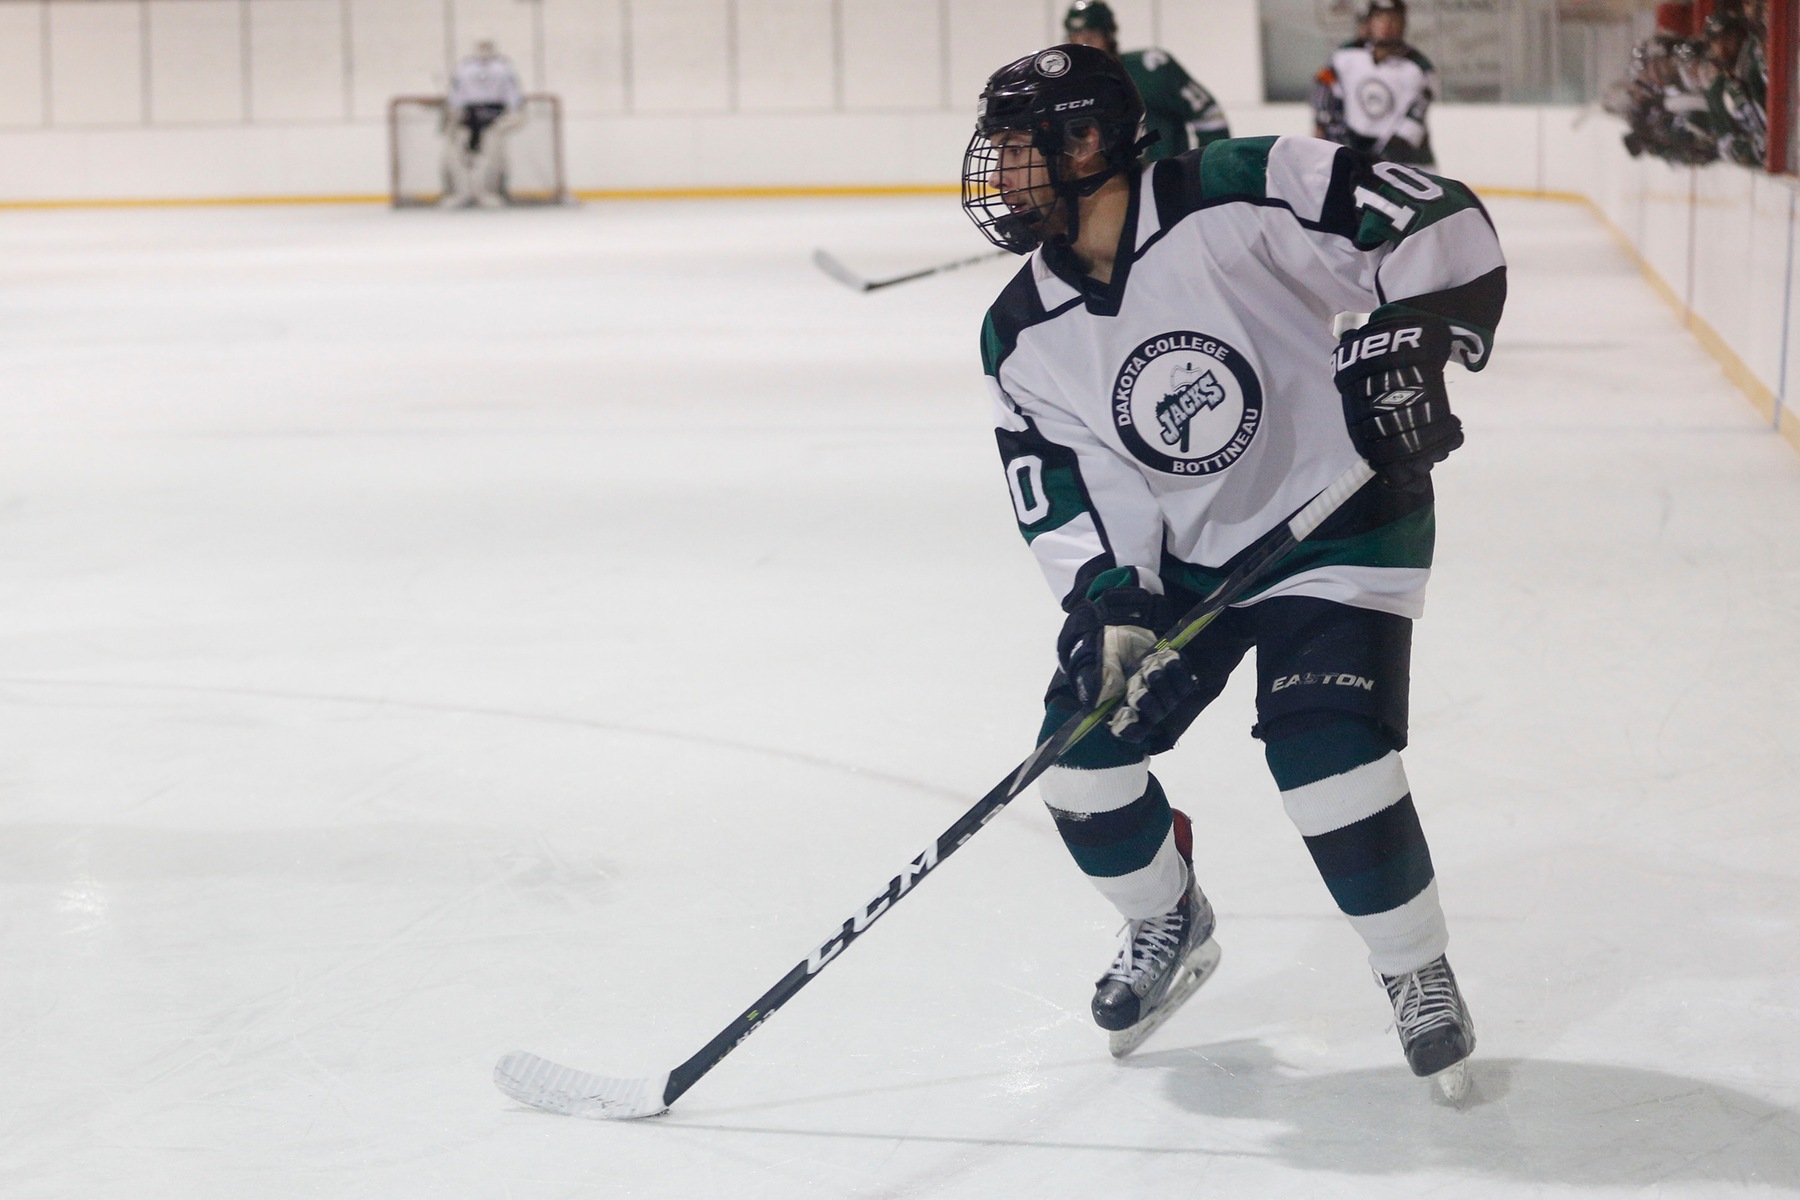 Wade Thompson picked up 3 goals and 2 assists in a pair of weekend wins for DCB. He now has 10 goals and 18 points on the season.